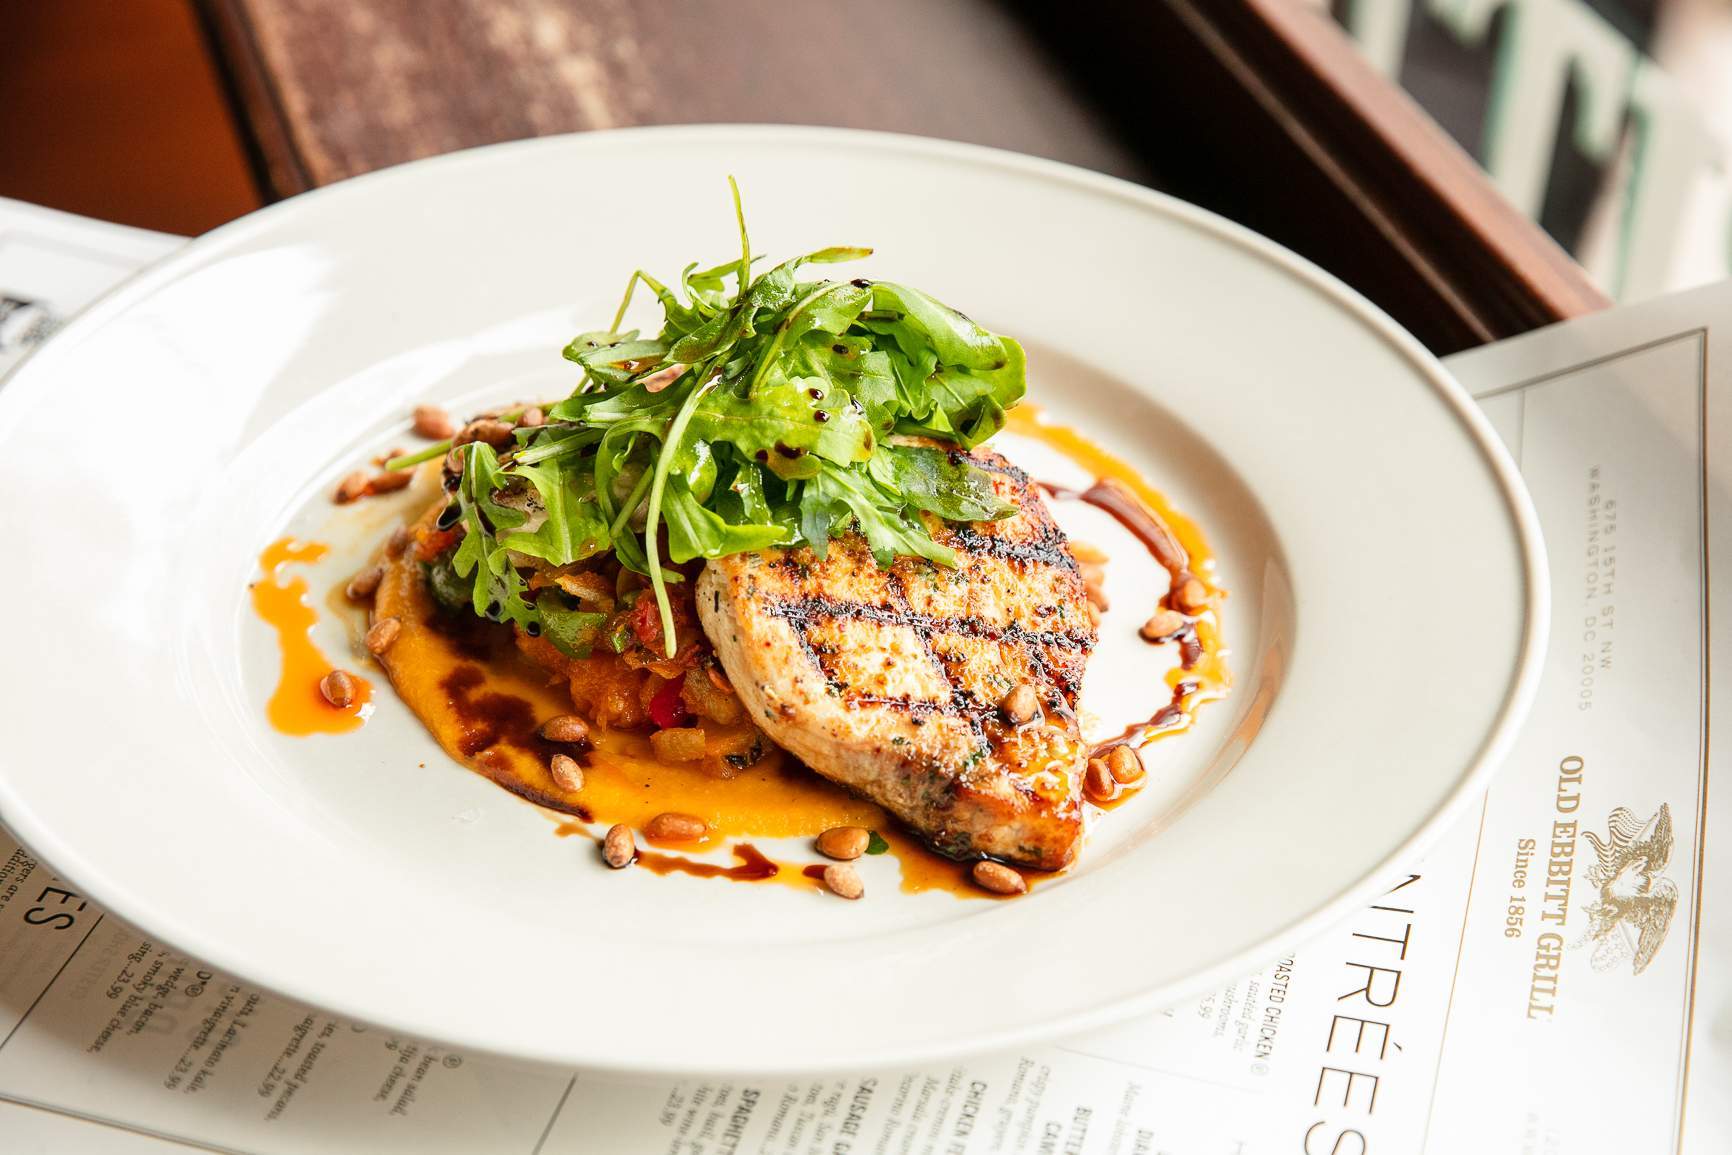 Pan-seared Chesapeake Bay rockfish with pine nuts at Old Ebbitt Grill in downtown D.C.